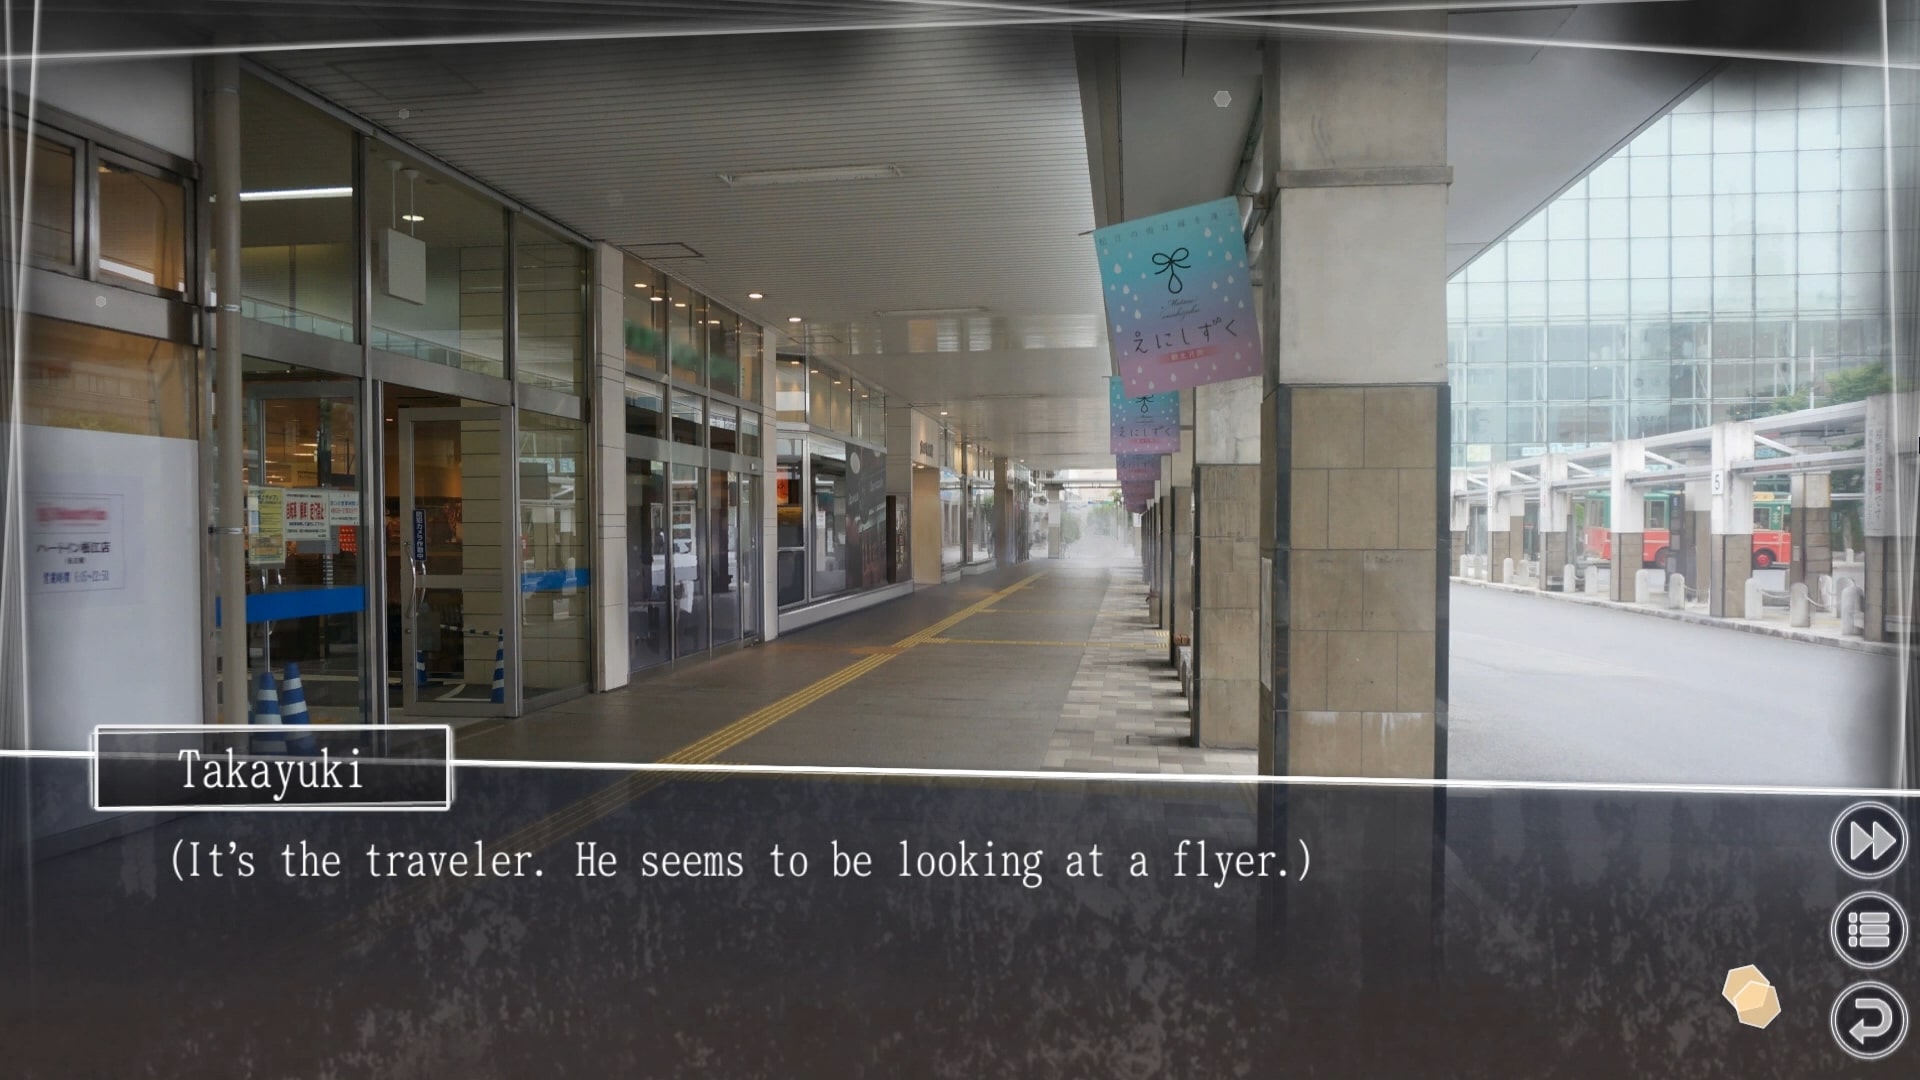 Root Letter Last Answer - Additional Scenarios for Root Letter Last Answer - Scenario 1: Wandering Traveler - 2A7A91B